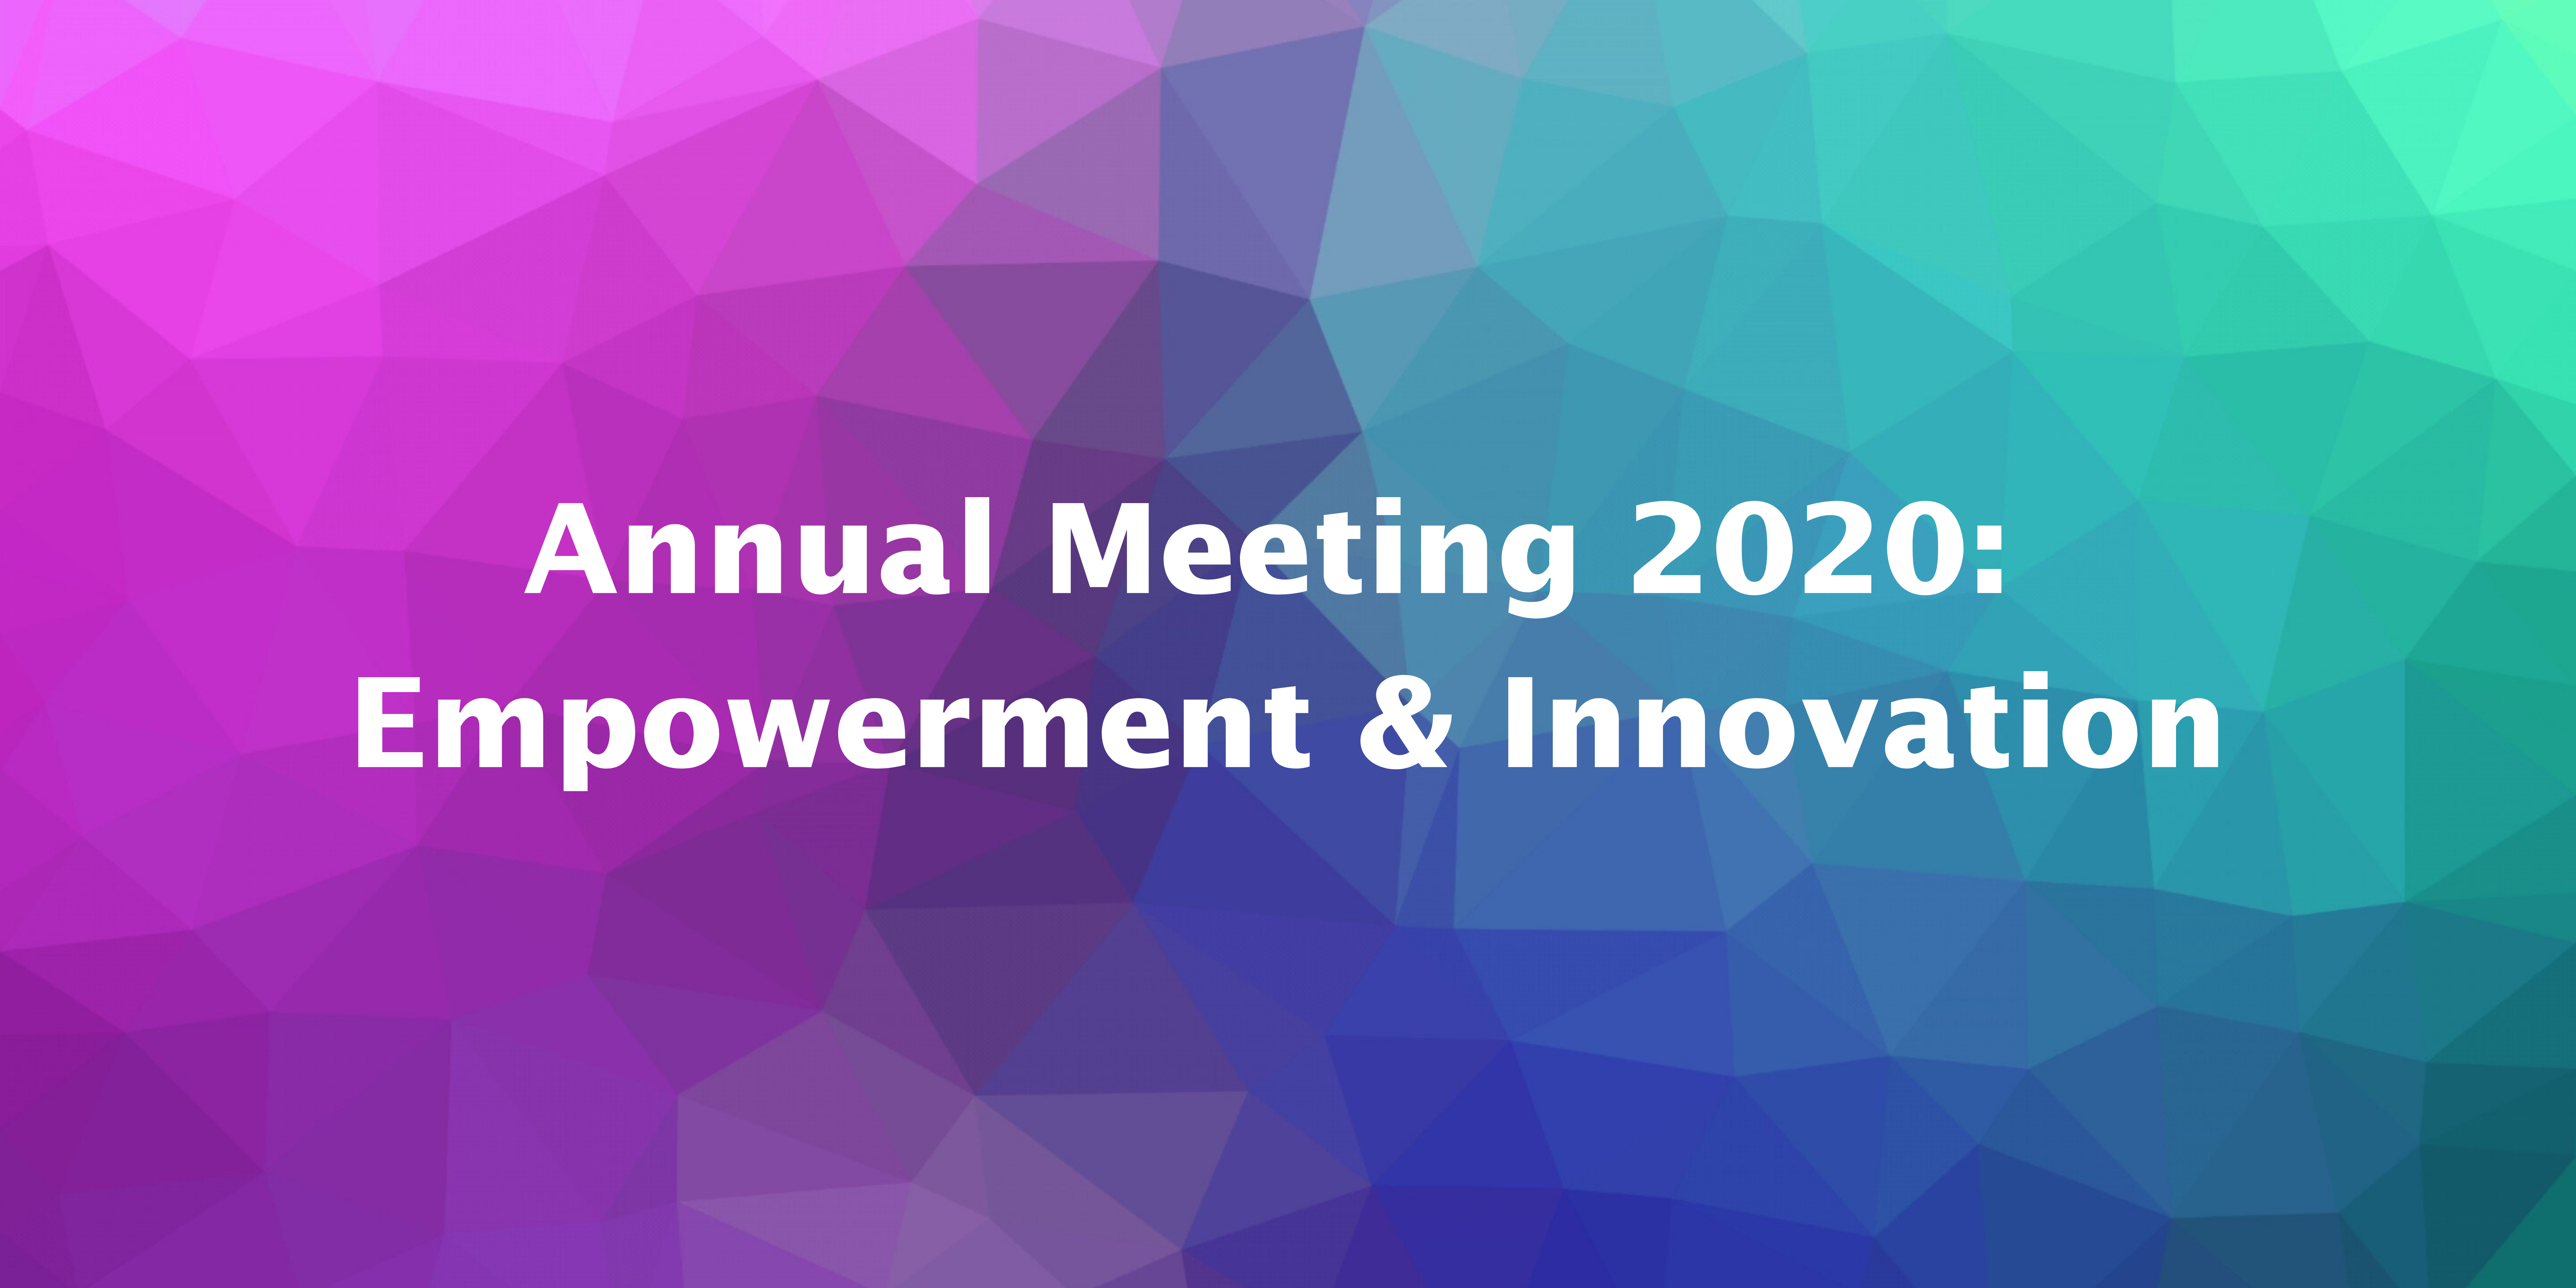 Annual Meeting 2020: Empowerment & Innovation